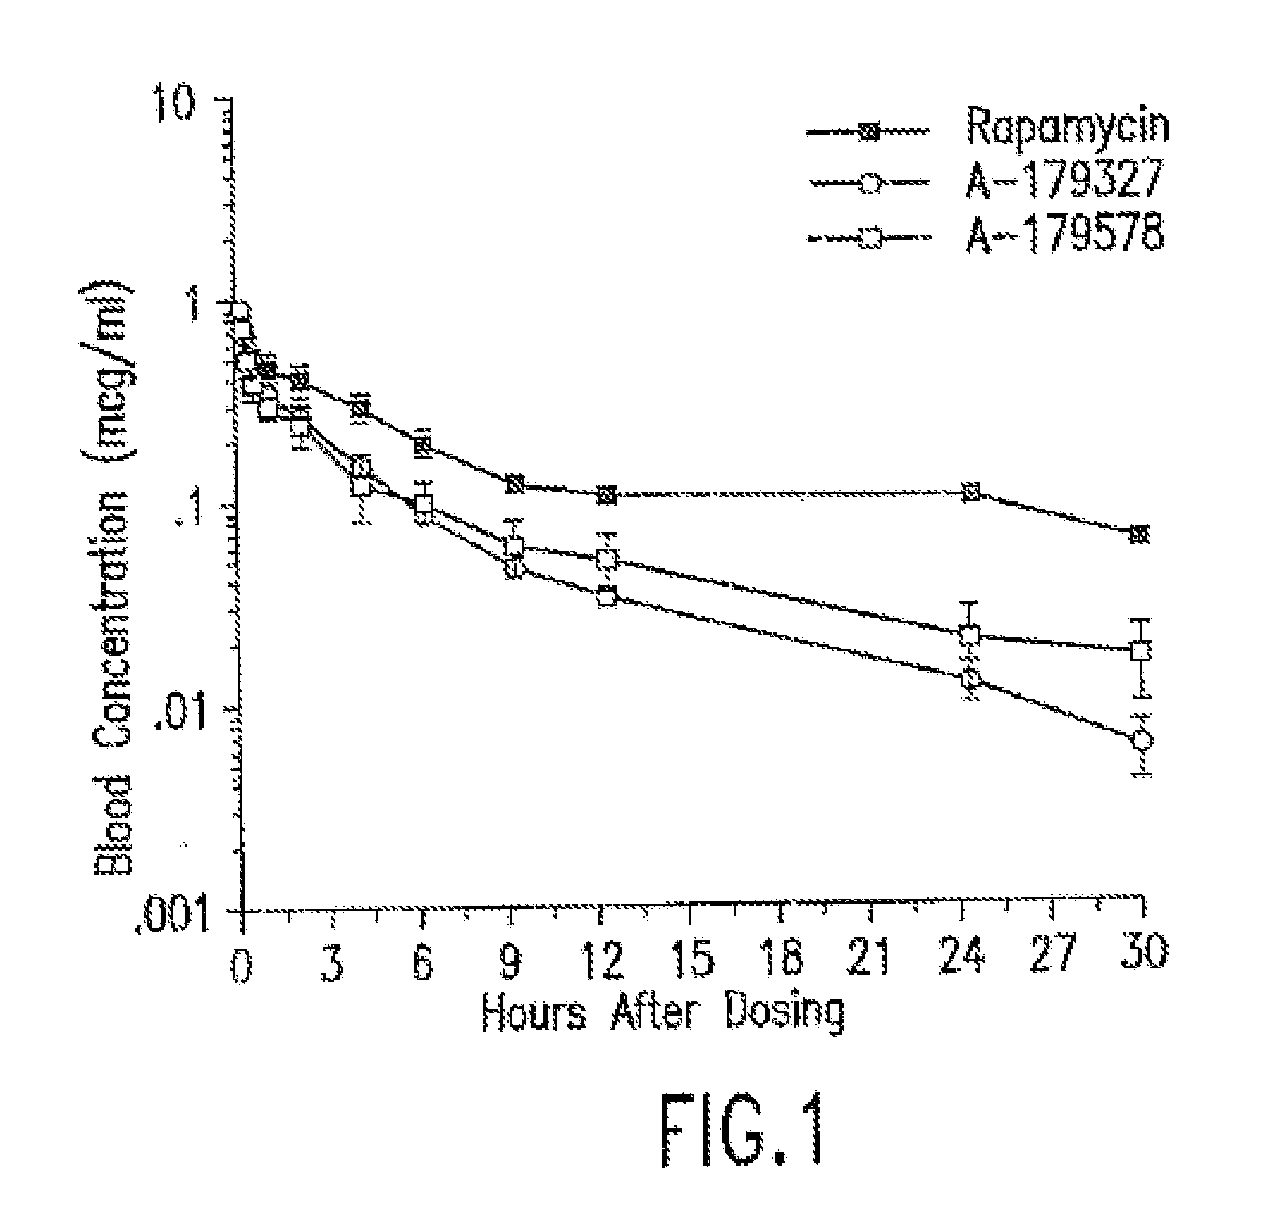 Medical Devices Containing Rapamycin Analogs